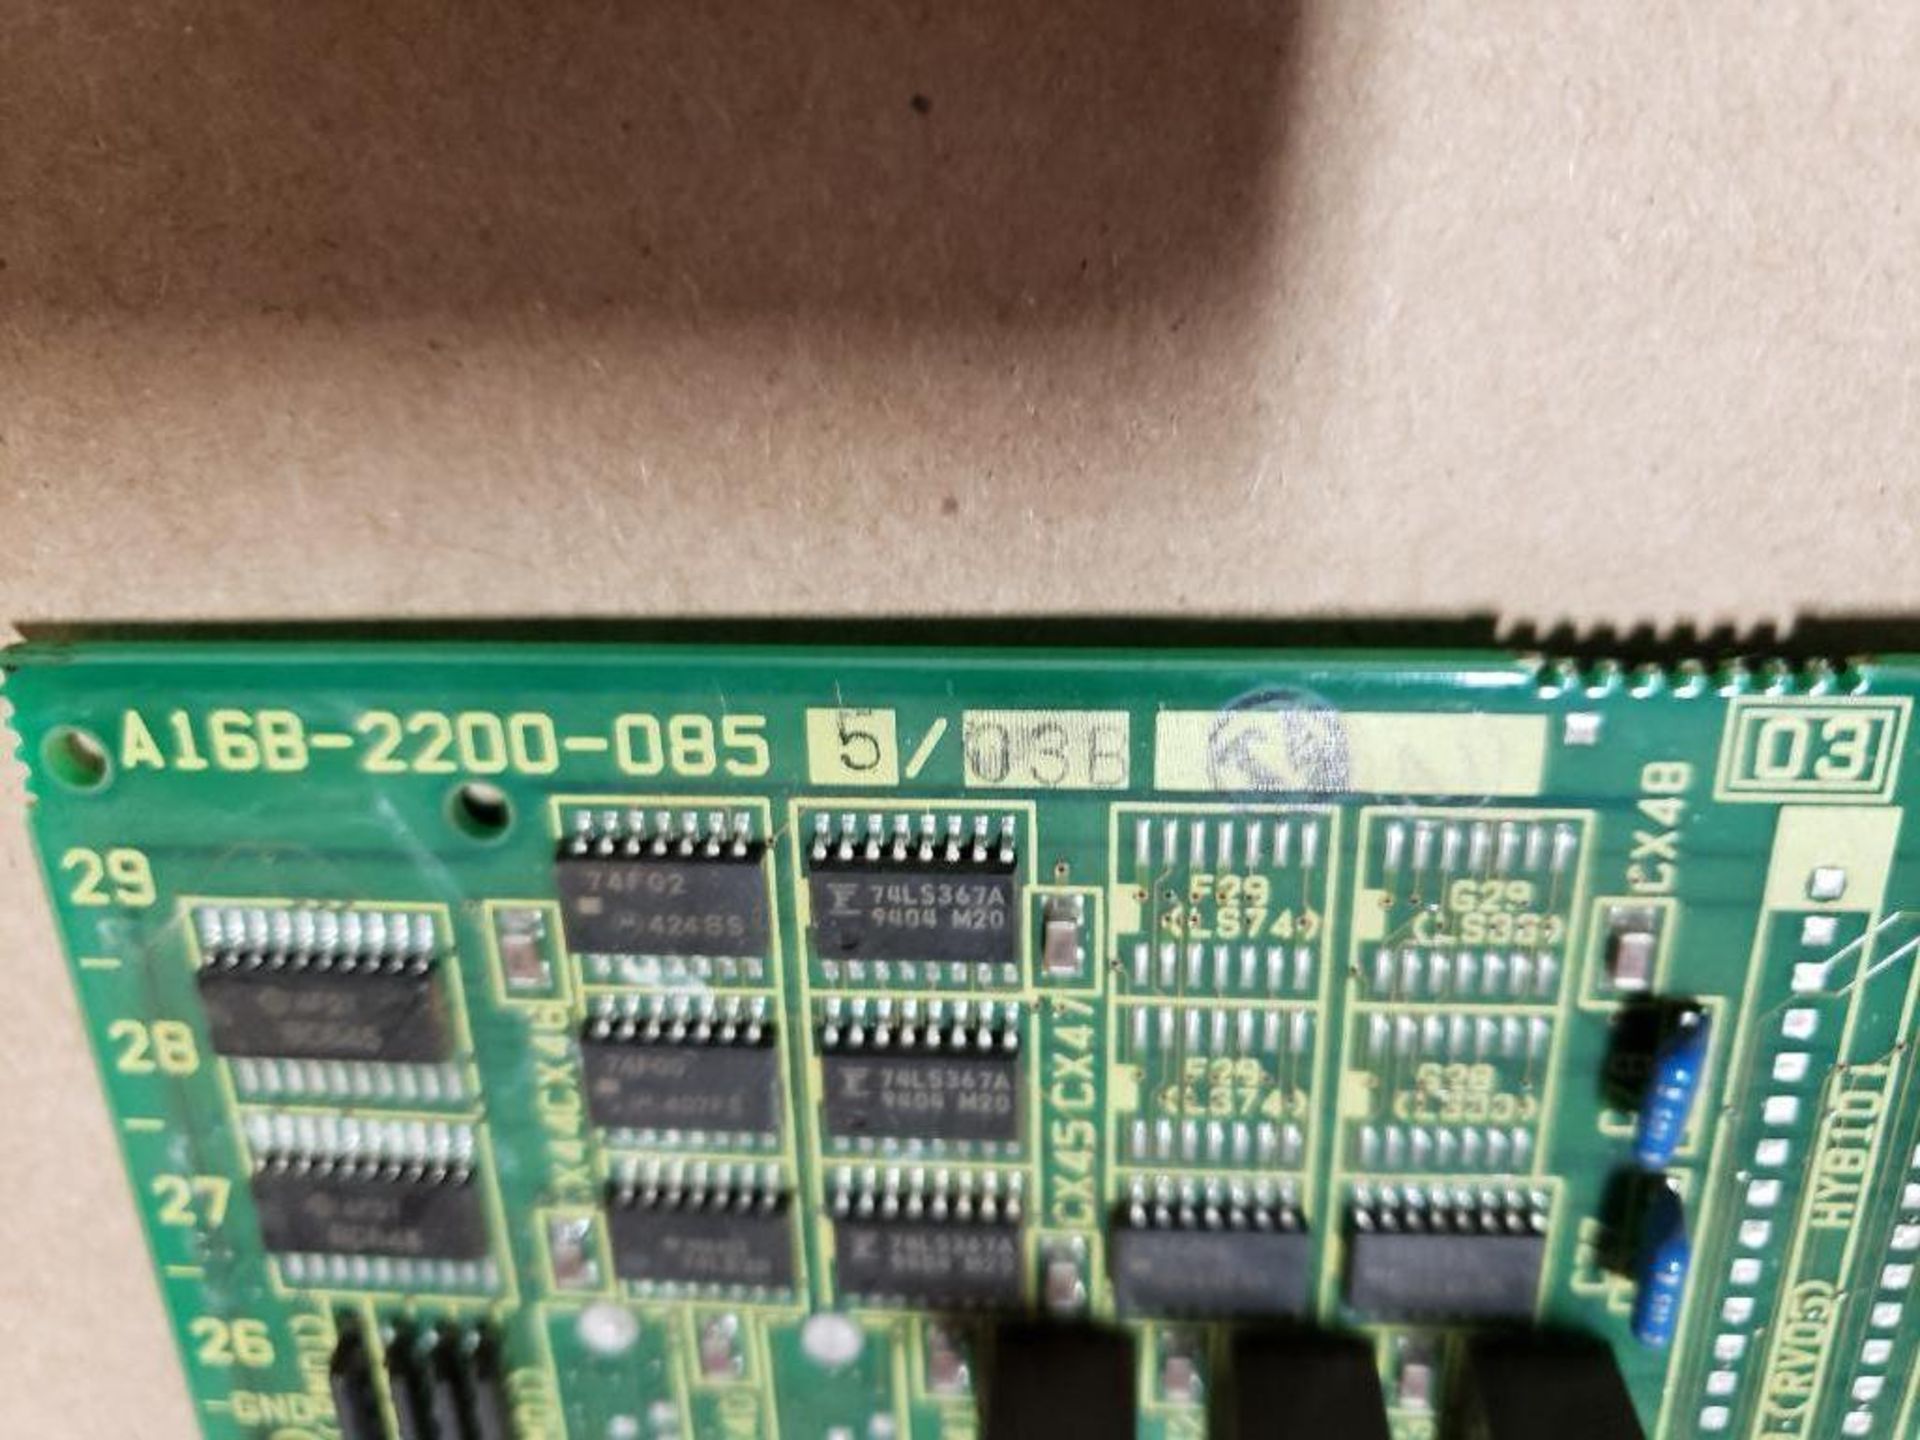 Fanuc control board. Part number A16B-2200-0855/03B. . - Image 3 of 5